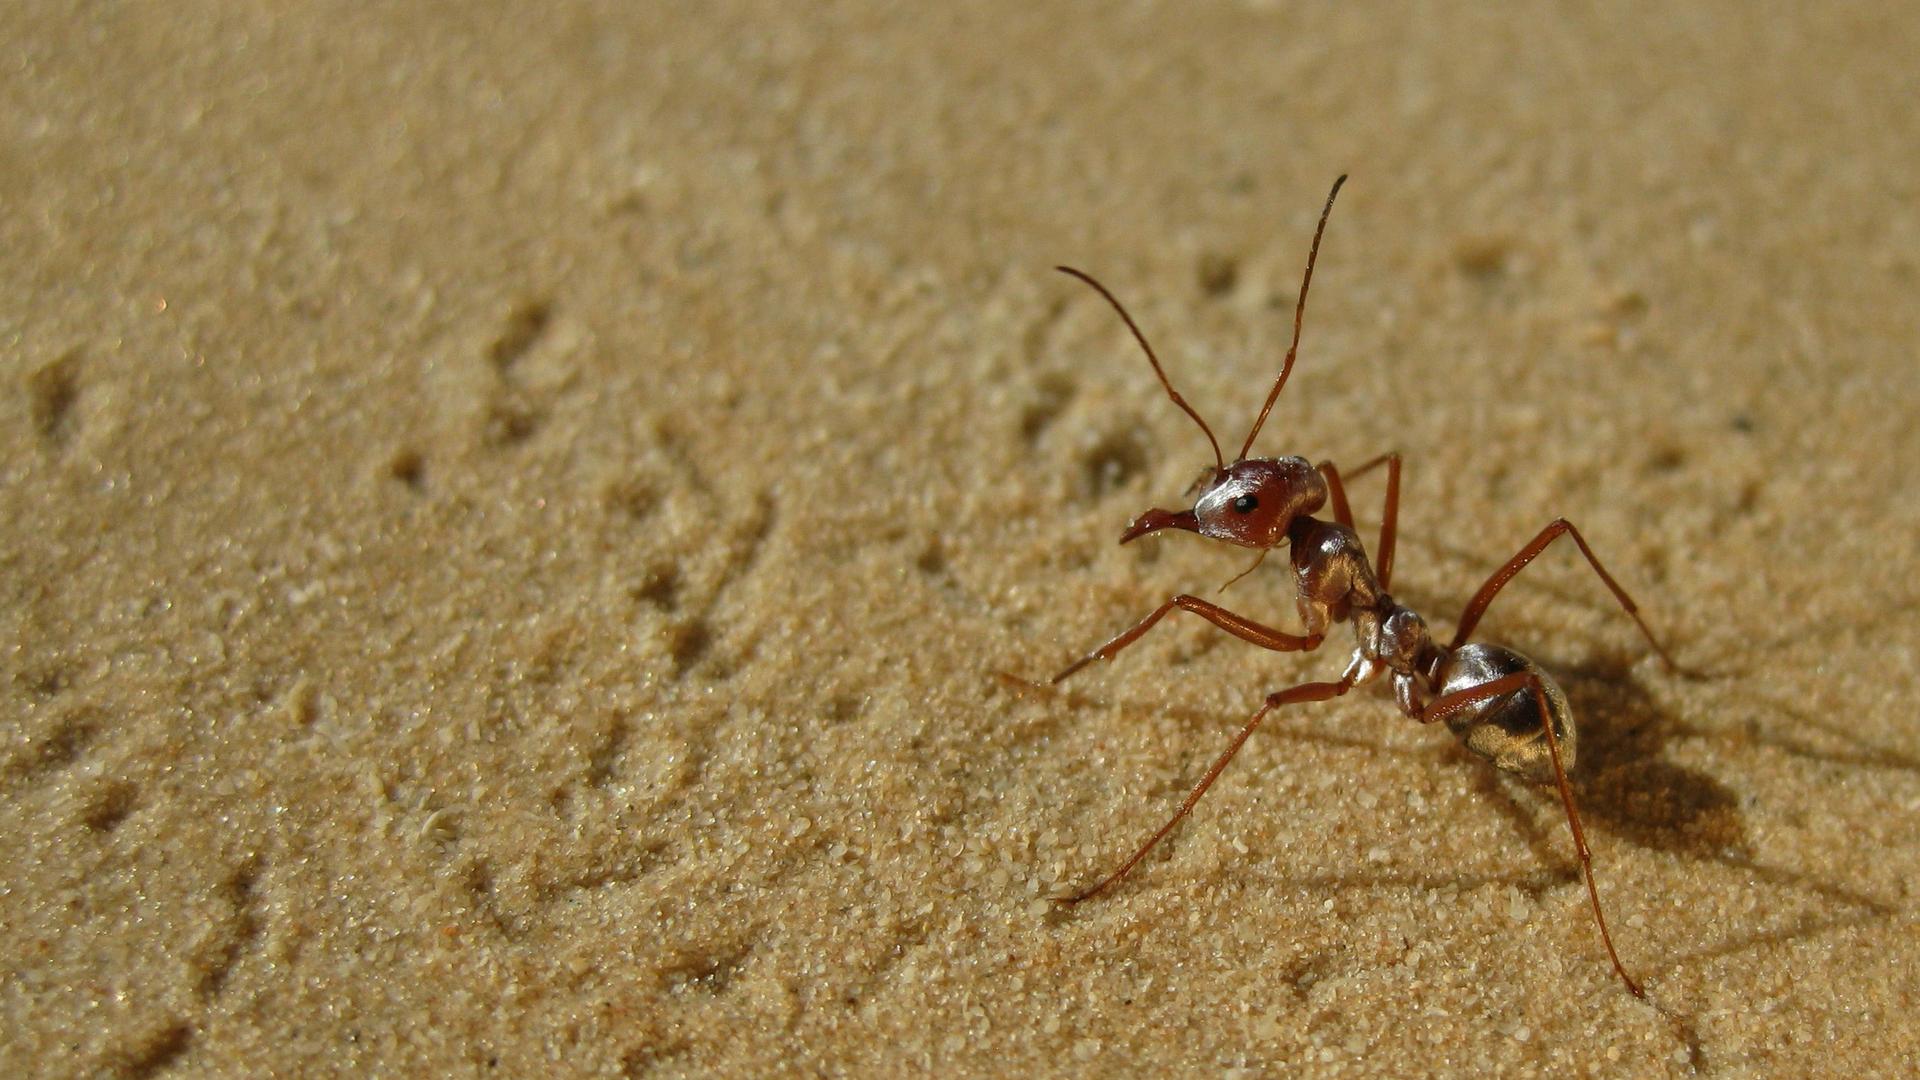 An up close image of an ant in sand 